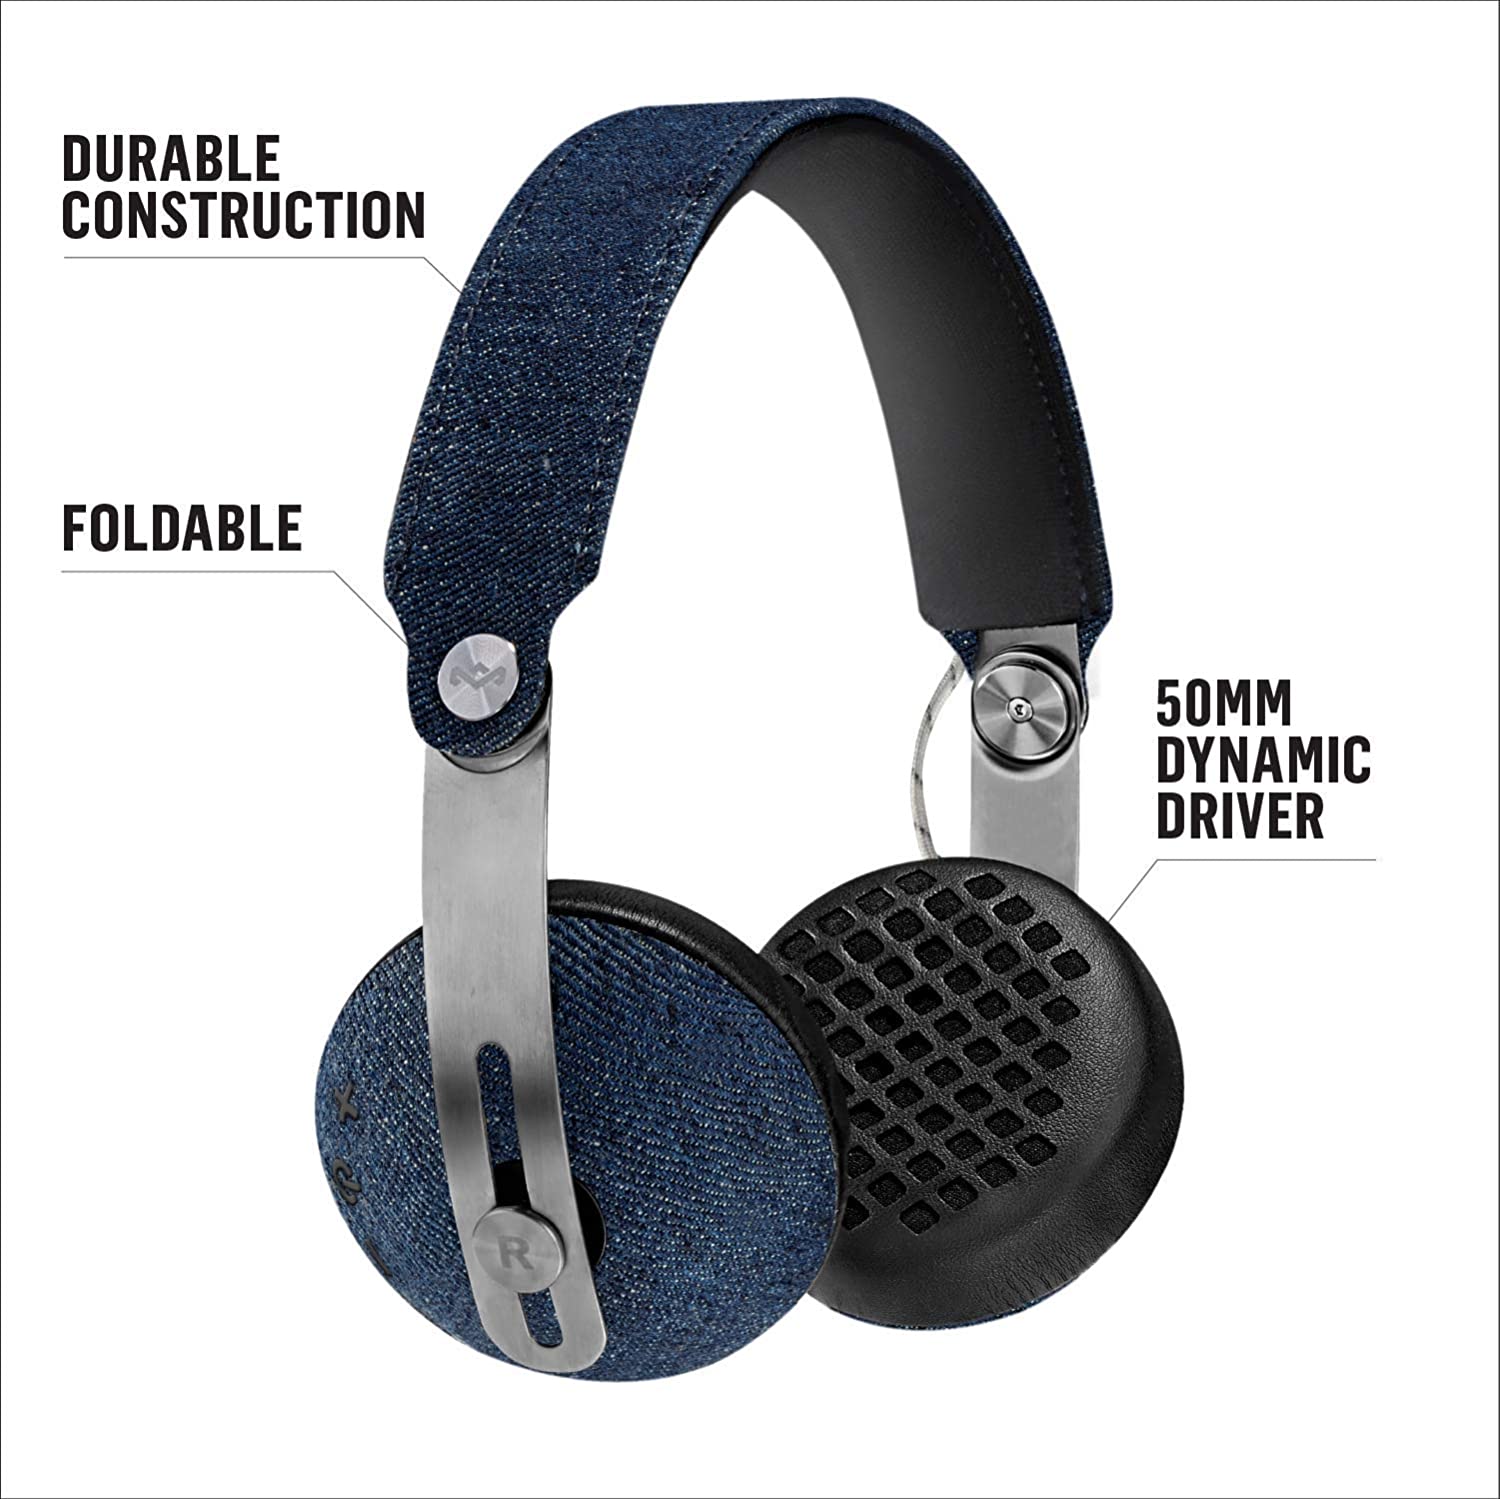 House of Marley Rise: Over-Ear Headphones with Microphone, Wireless Bluetooth Connectivity, and 12 Hours of Playtime (Denim)